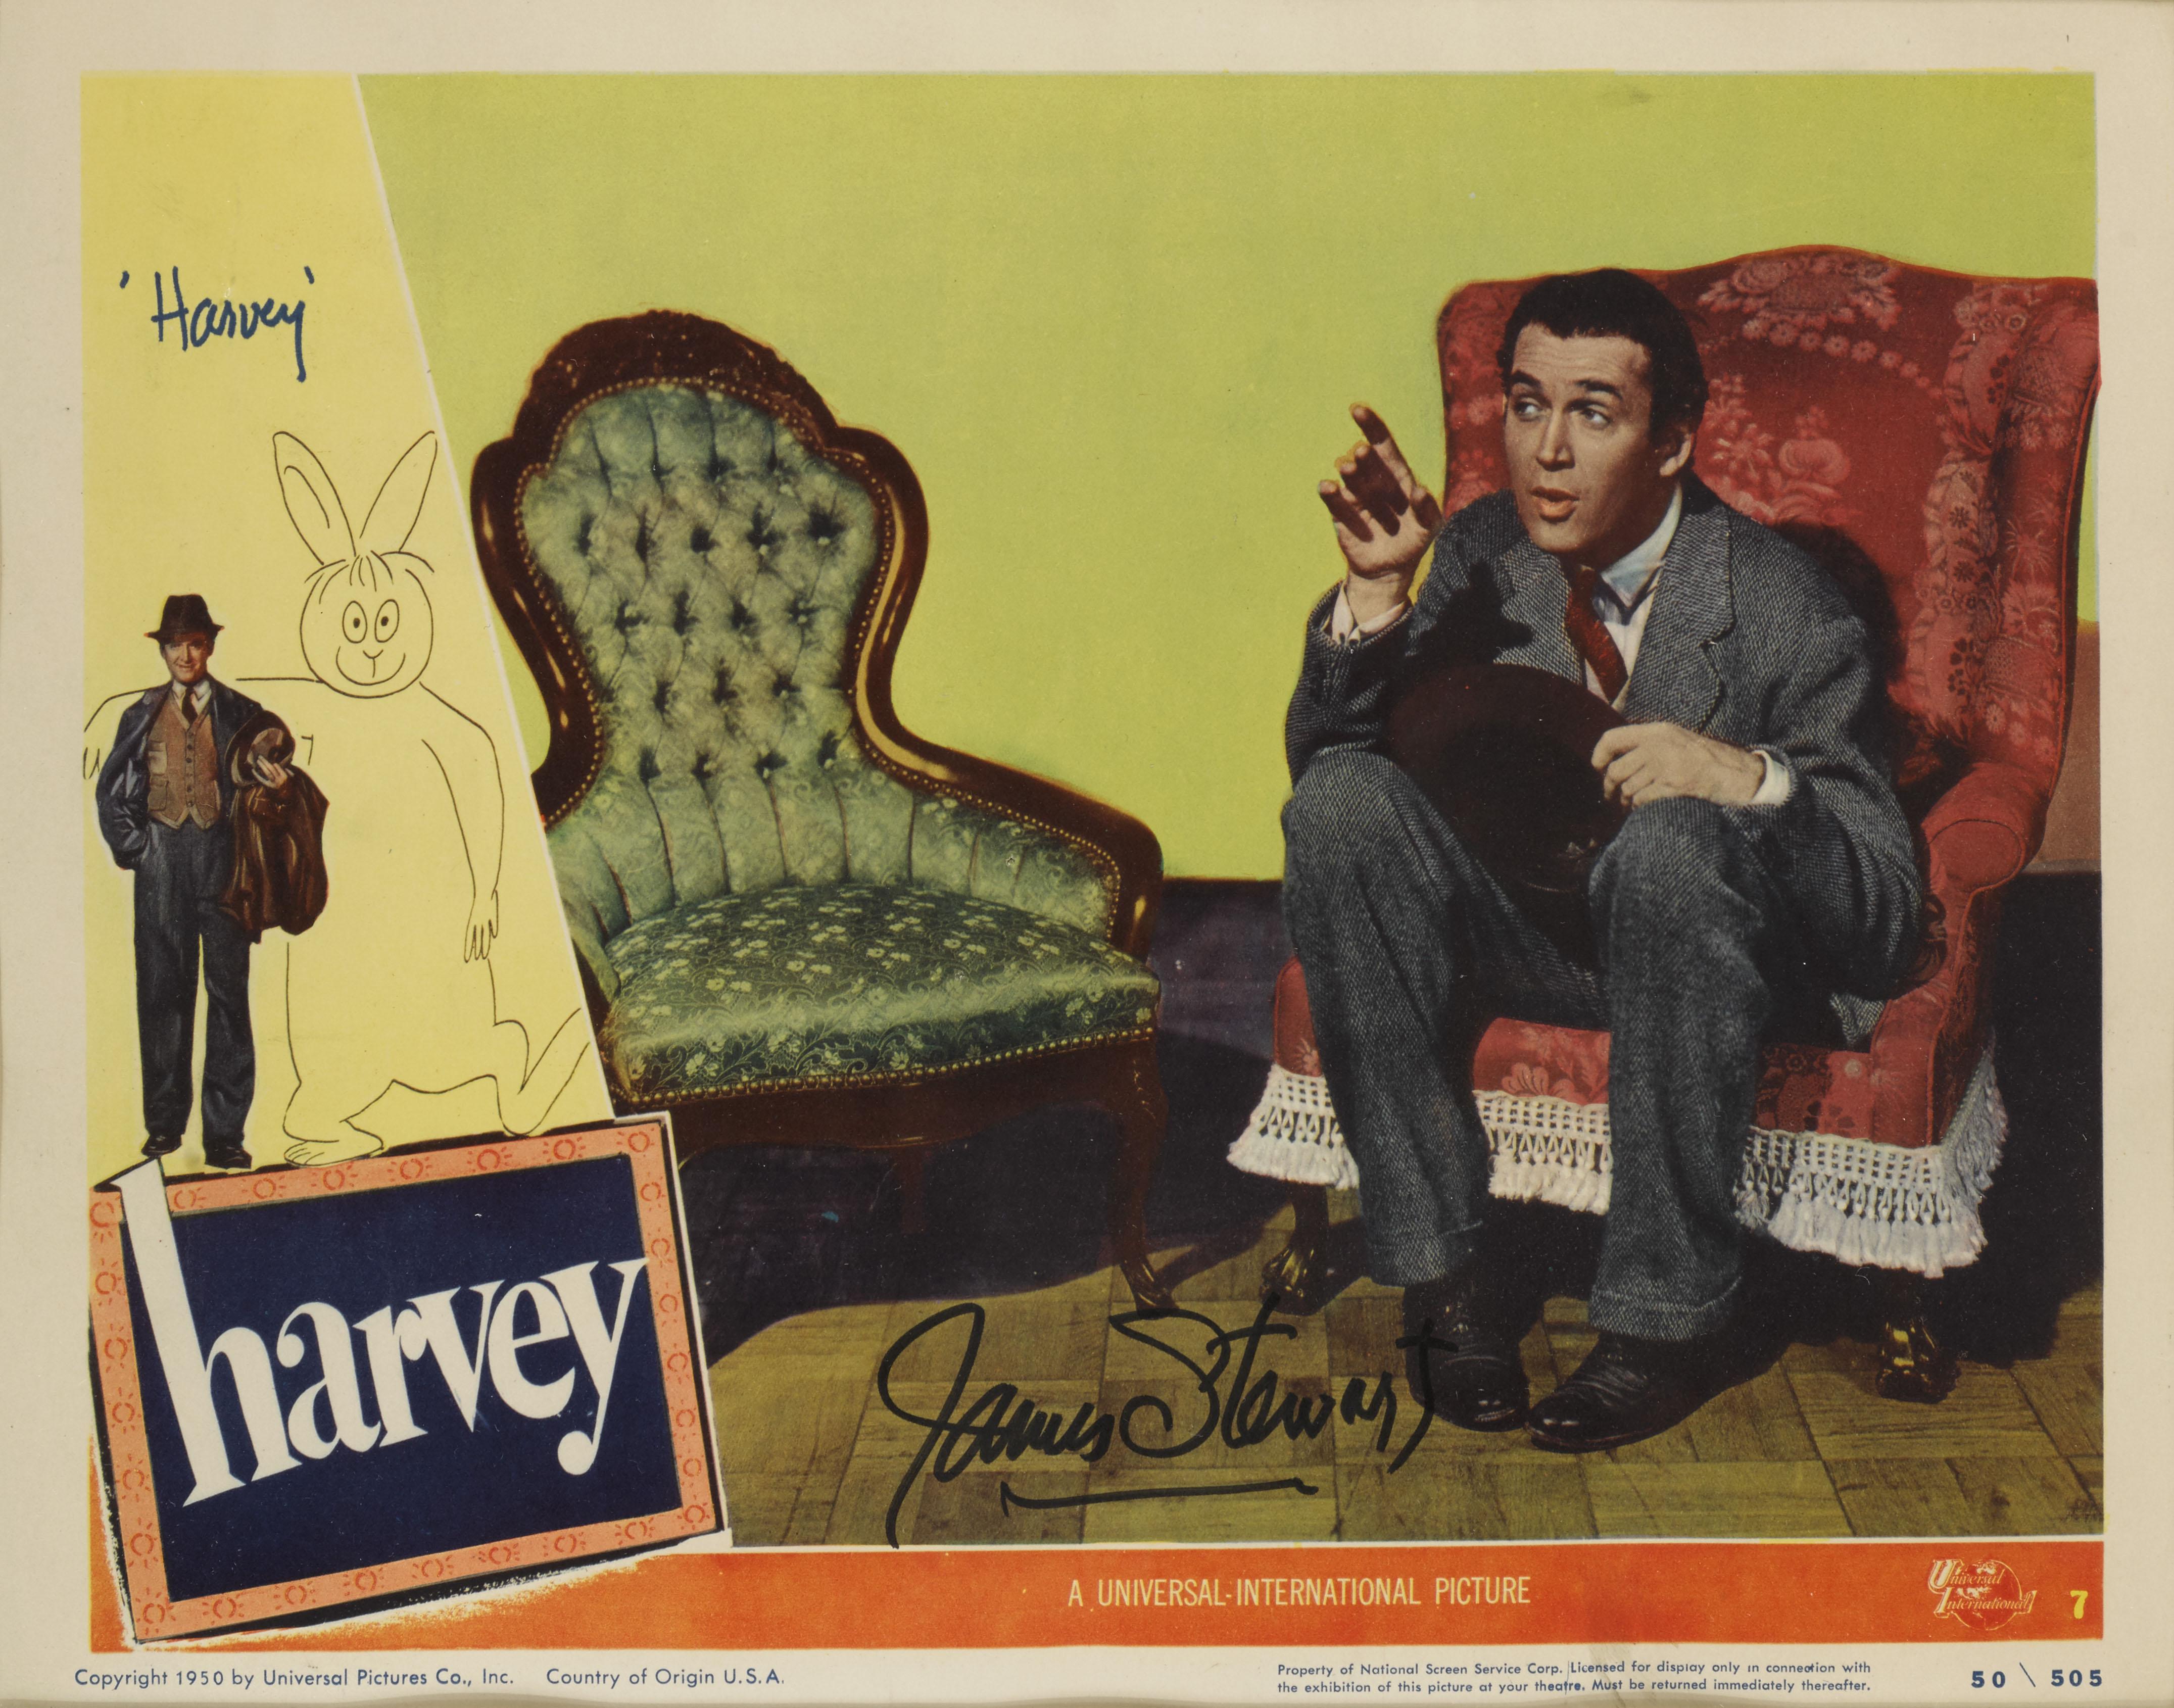 Original US Lobby card number 7 for Harvey, 1950.
This Lobby card has been signed by James Stewart.
This lobby card was previously in the collection of a US collector, who obtained the signature in person at the Motion Picture retirement home in